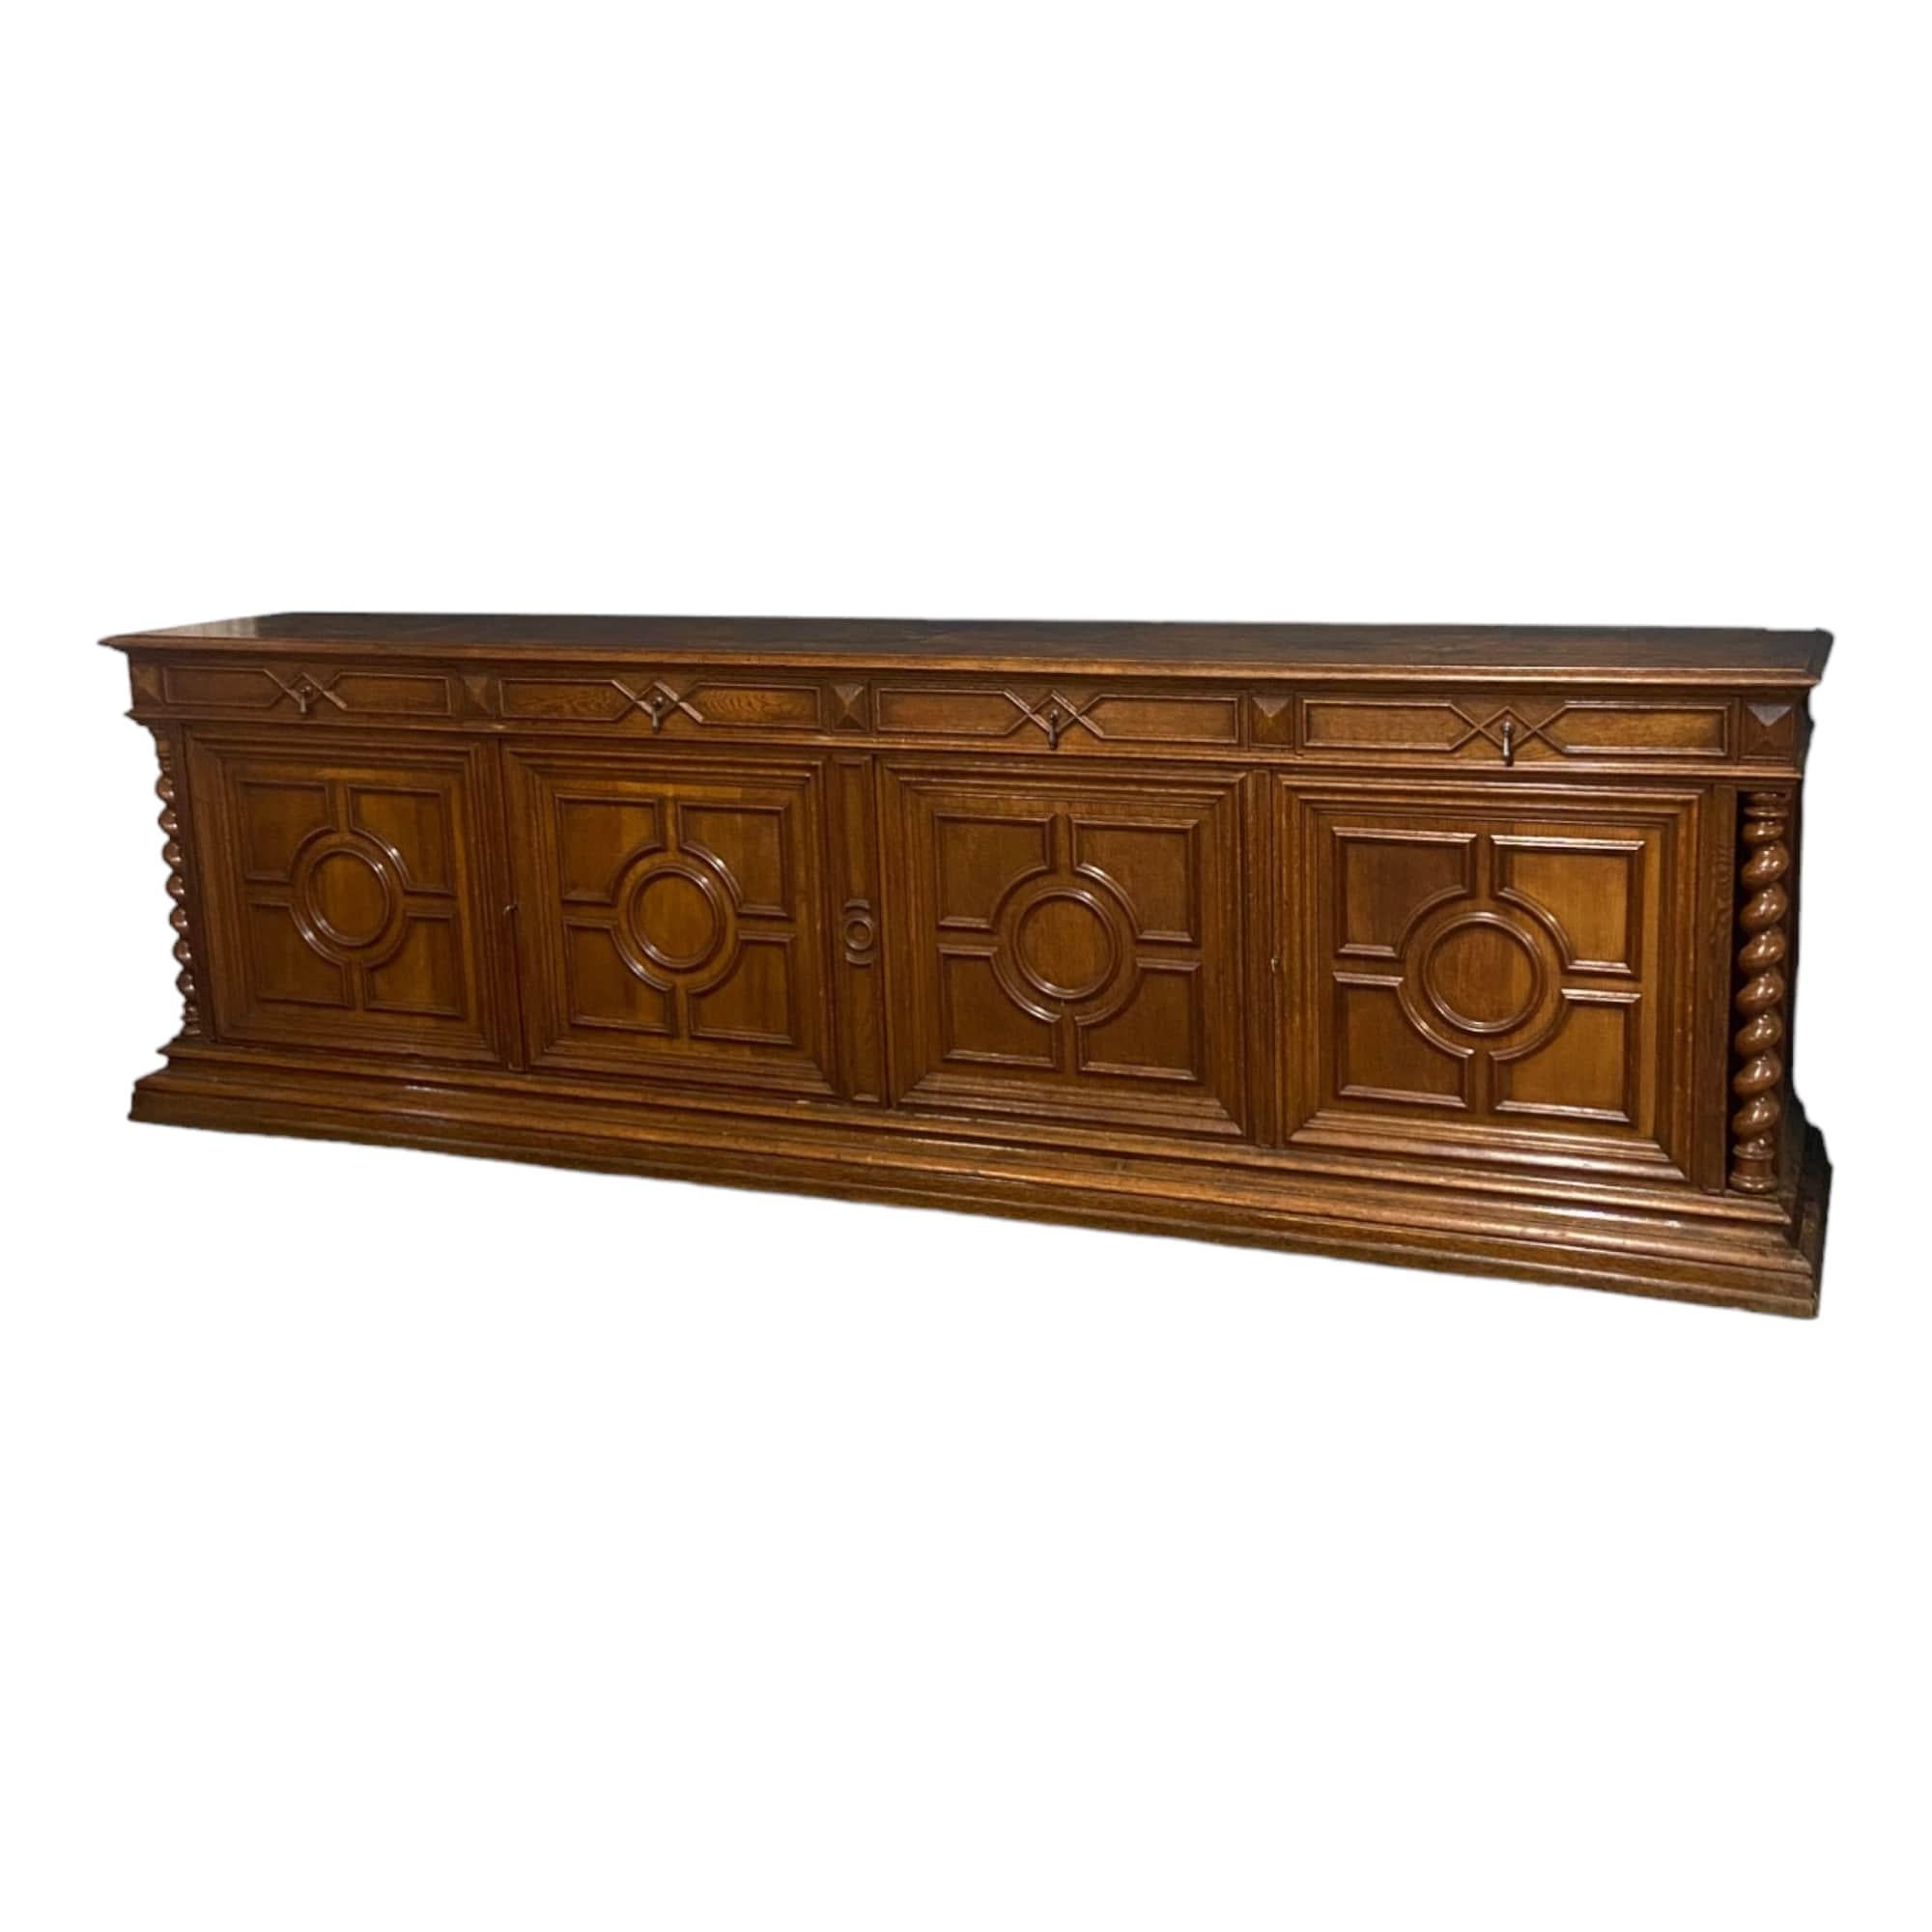 Coming from France. Immerse yourself in the opulence and charm of the Louis XIII style with this imposing sideboard, a majestic piece that evokes the elegance and refinement of the era.

Featuring strong lines and an imposing silhouette, this